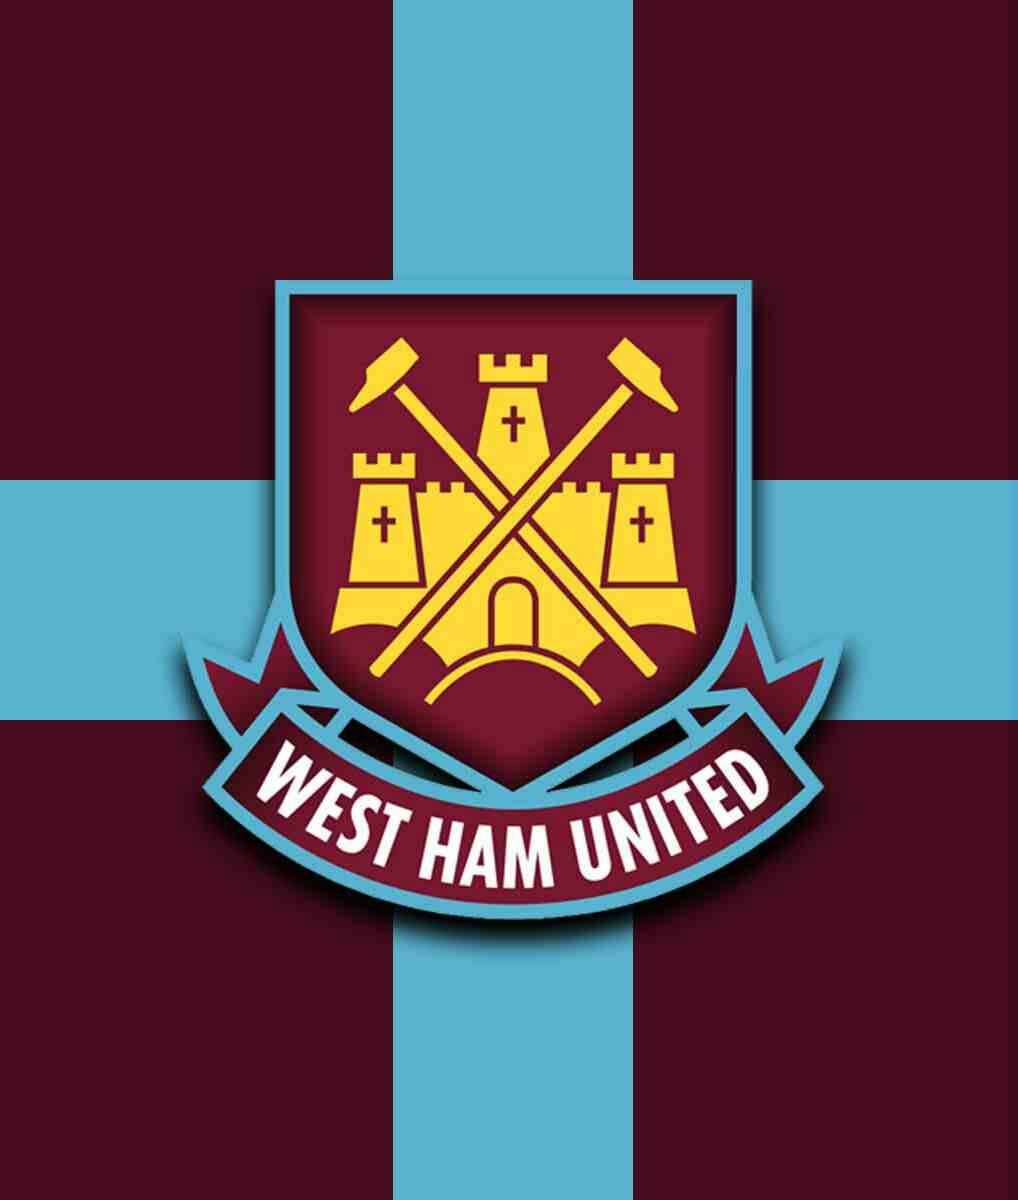 10 Best West Ham United Wallpapers FULL HD 1920×1080 For PC Background 2020